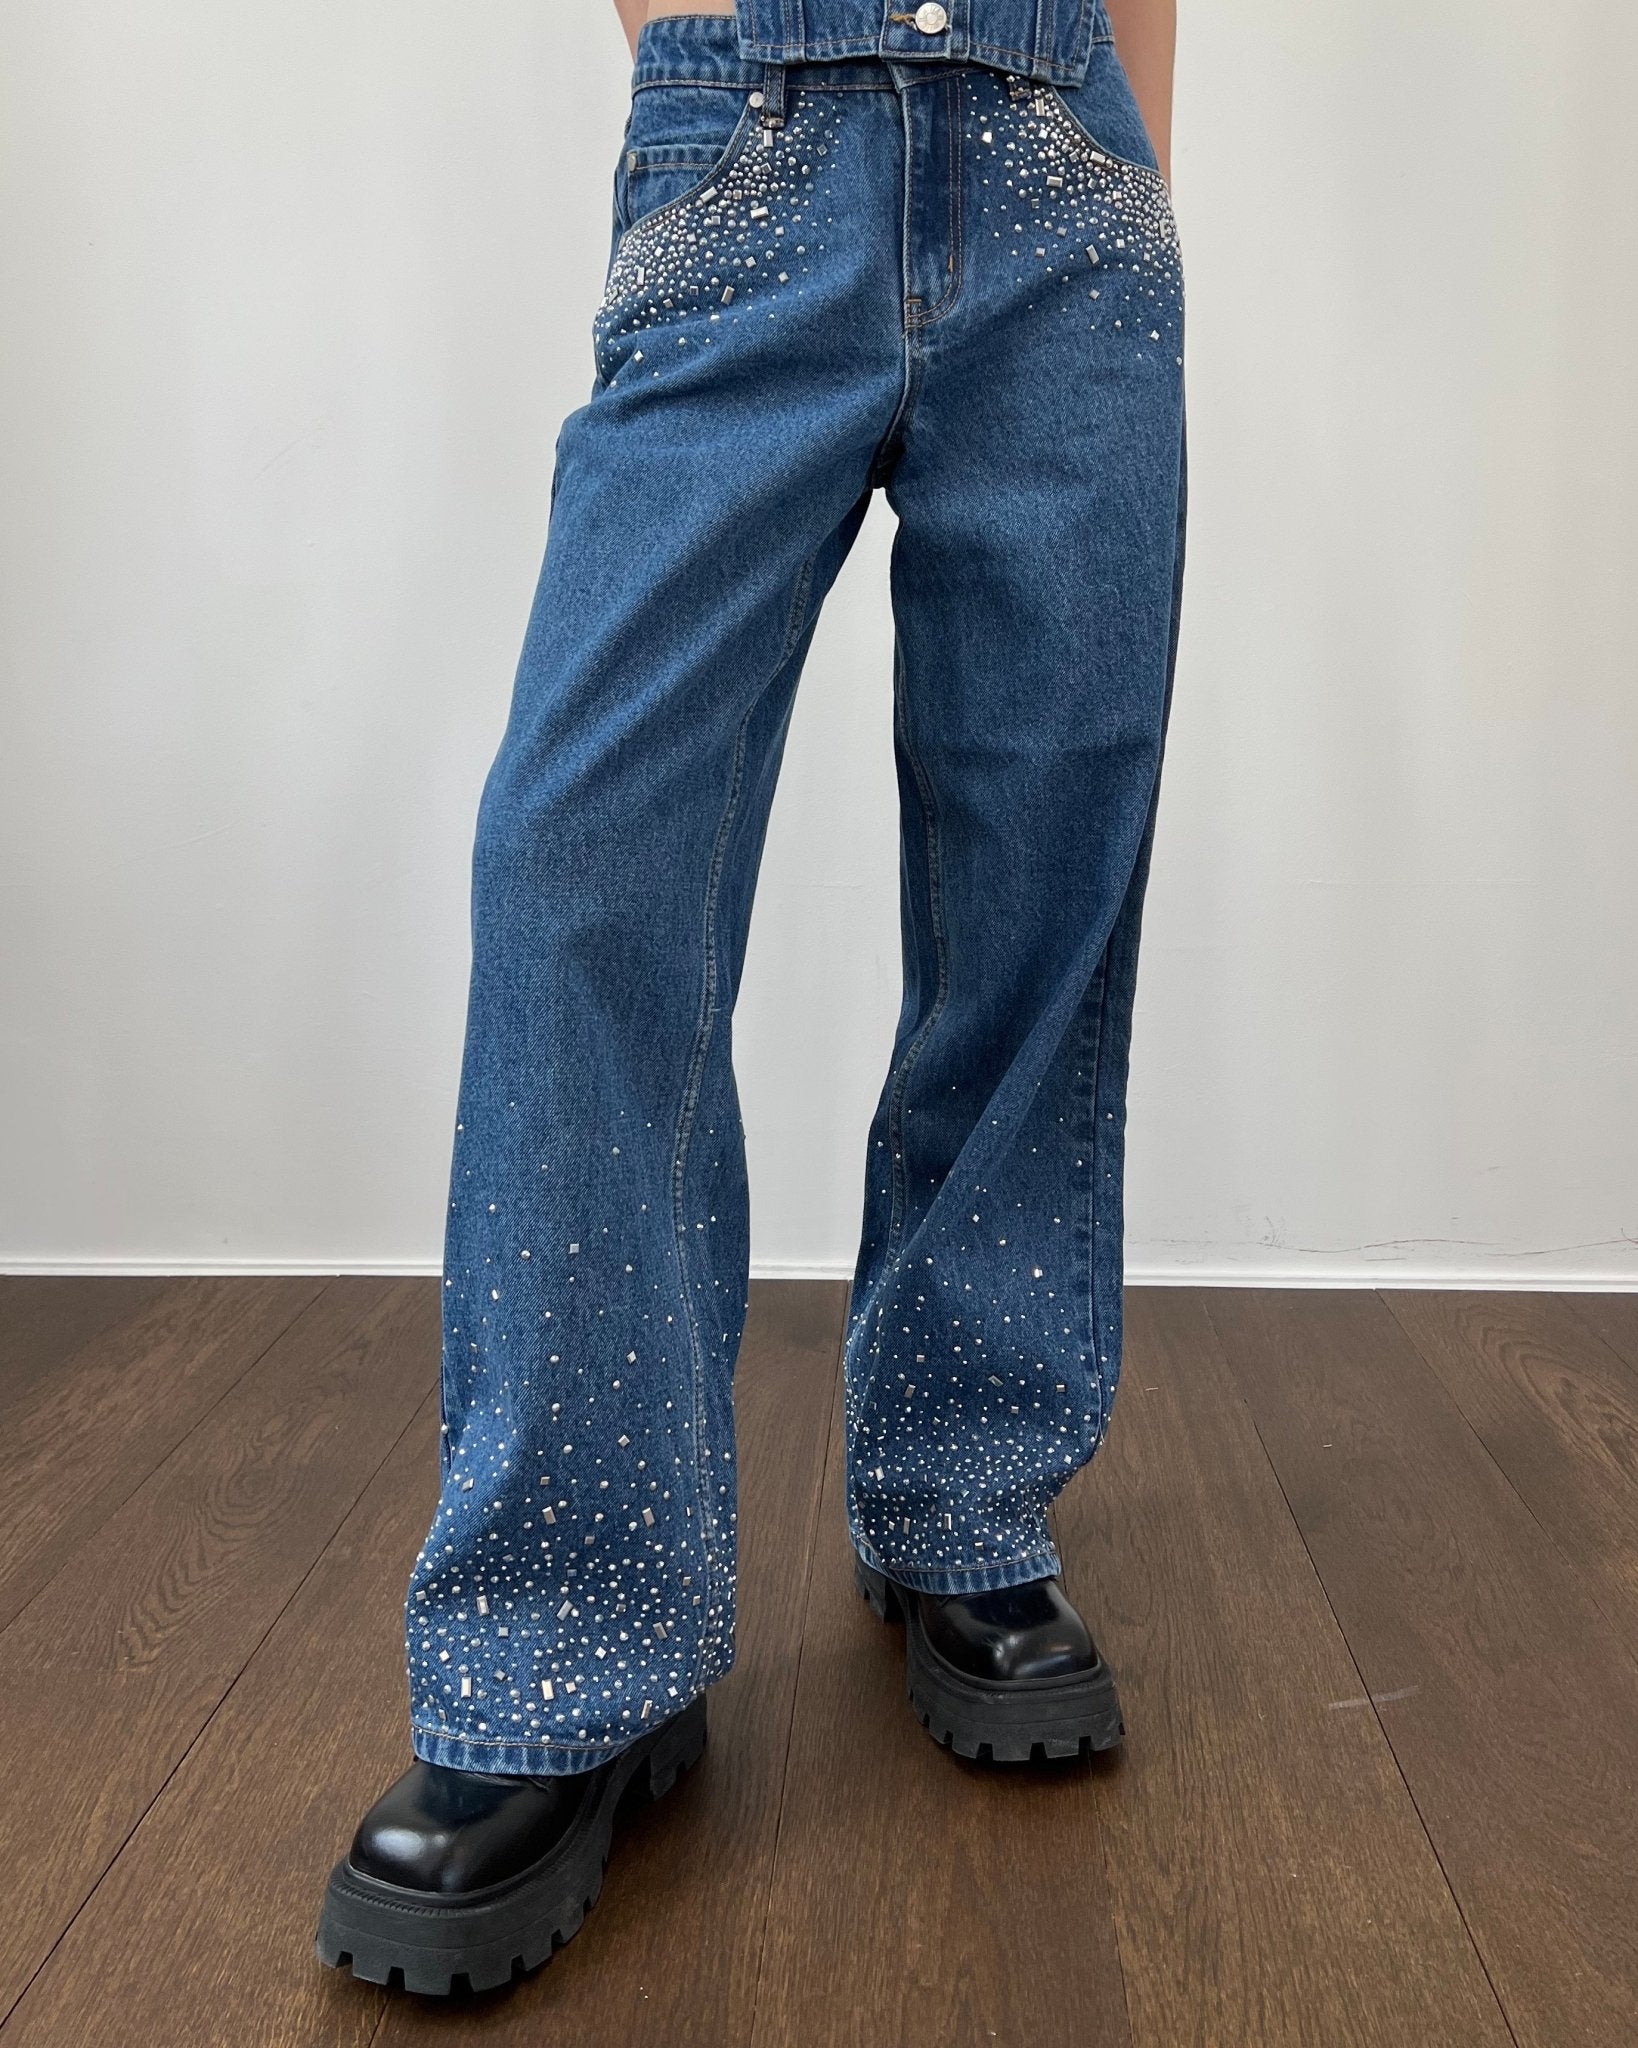 Shop The Ragged Priest Milk It Ziggy Scatter Glitter Wide Leg Jeans - Premium Trousers from The Ragged Priest Online now at Spoiled Brat 